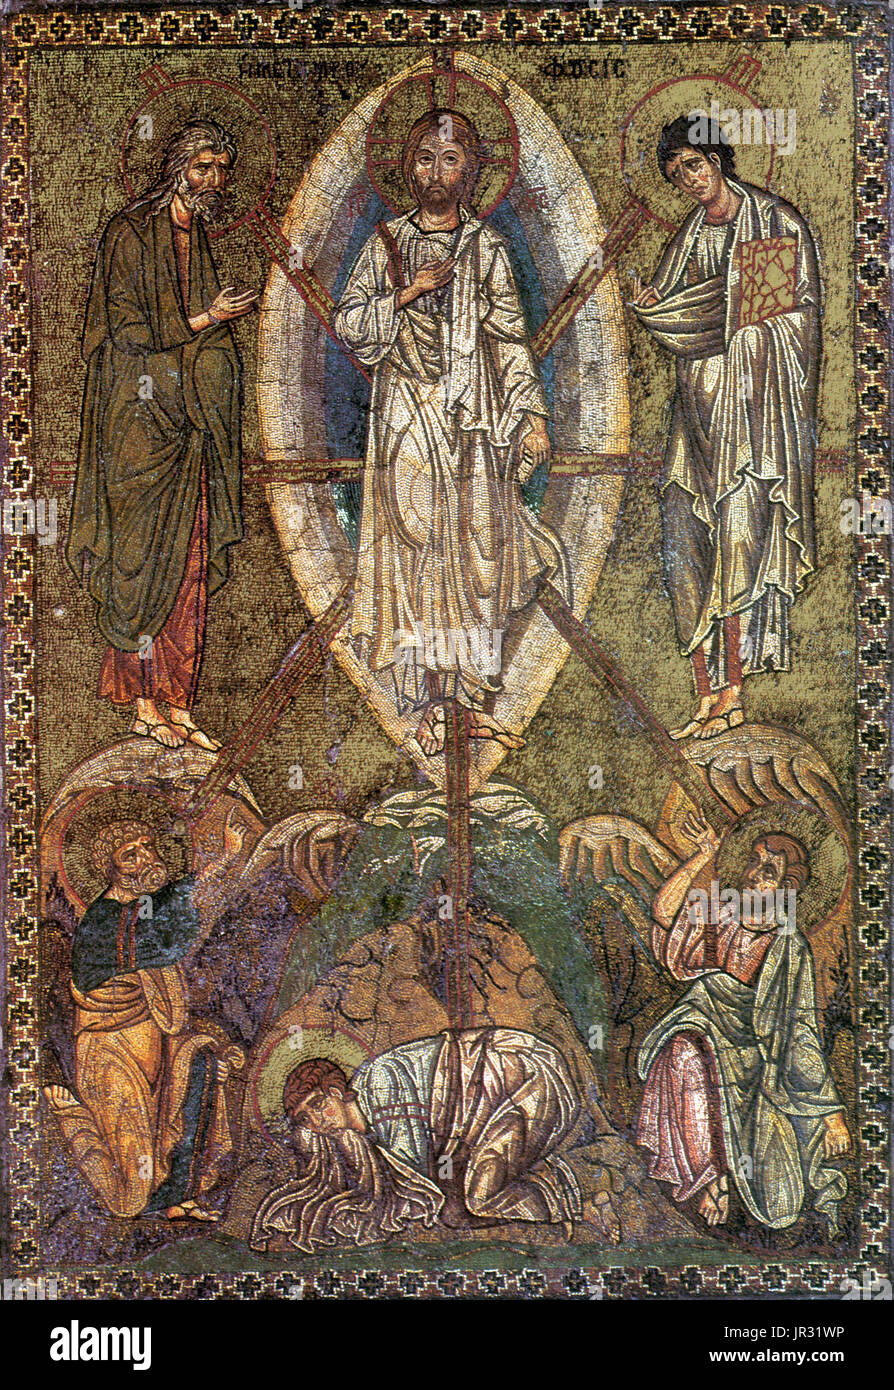 Byzantine school portable icon depicting the Transfiguration Jesus. The Transfiguration of Jesus has been an important subject in Christian art, above all in the Eastern church, some of whose most striking icons show the scene. Mosaics were more central to Byzantine culture than to that of Western Europe. Byzantine church interiors were generally covered with golden mosaics. Mosaic art flourished in the Byzantine Empire from the 6th to the 15th centuries. Stock Photo